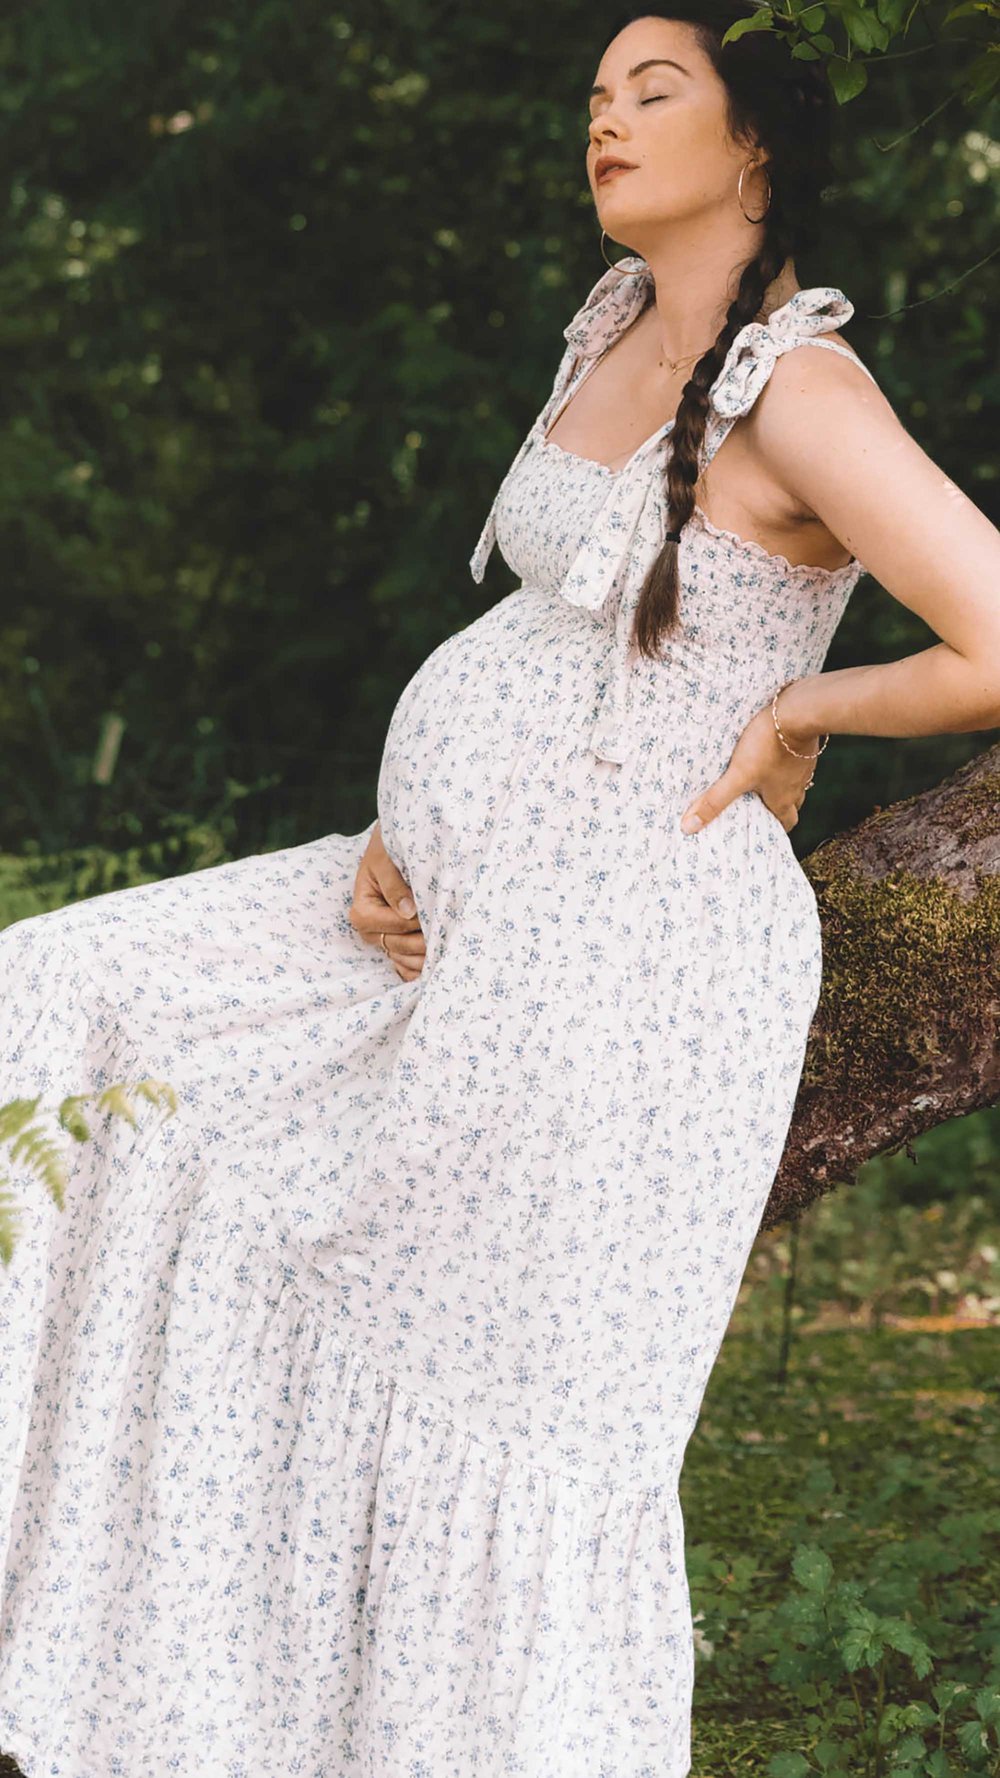 Casual Floral Maternity Dress Outfit. @sarahchristine wearing Nothing Fits Women’s Classic Nursing Momoka Dress with smocked chest in Seattle, Washington - 2.jpg